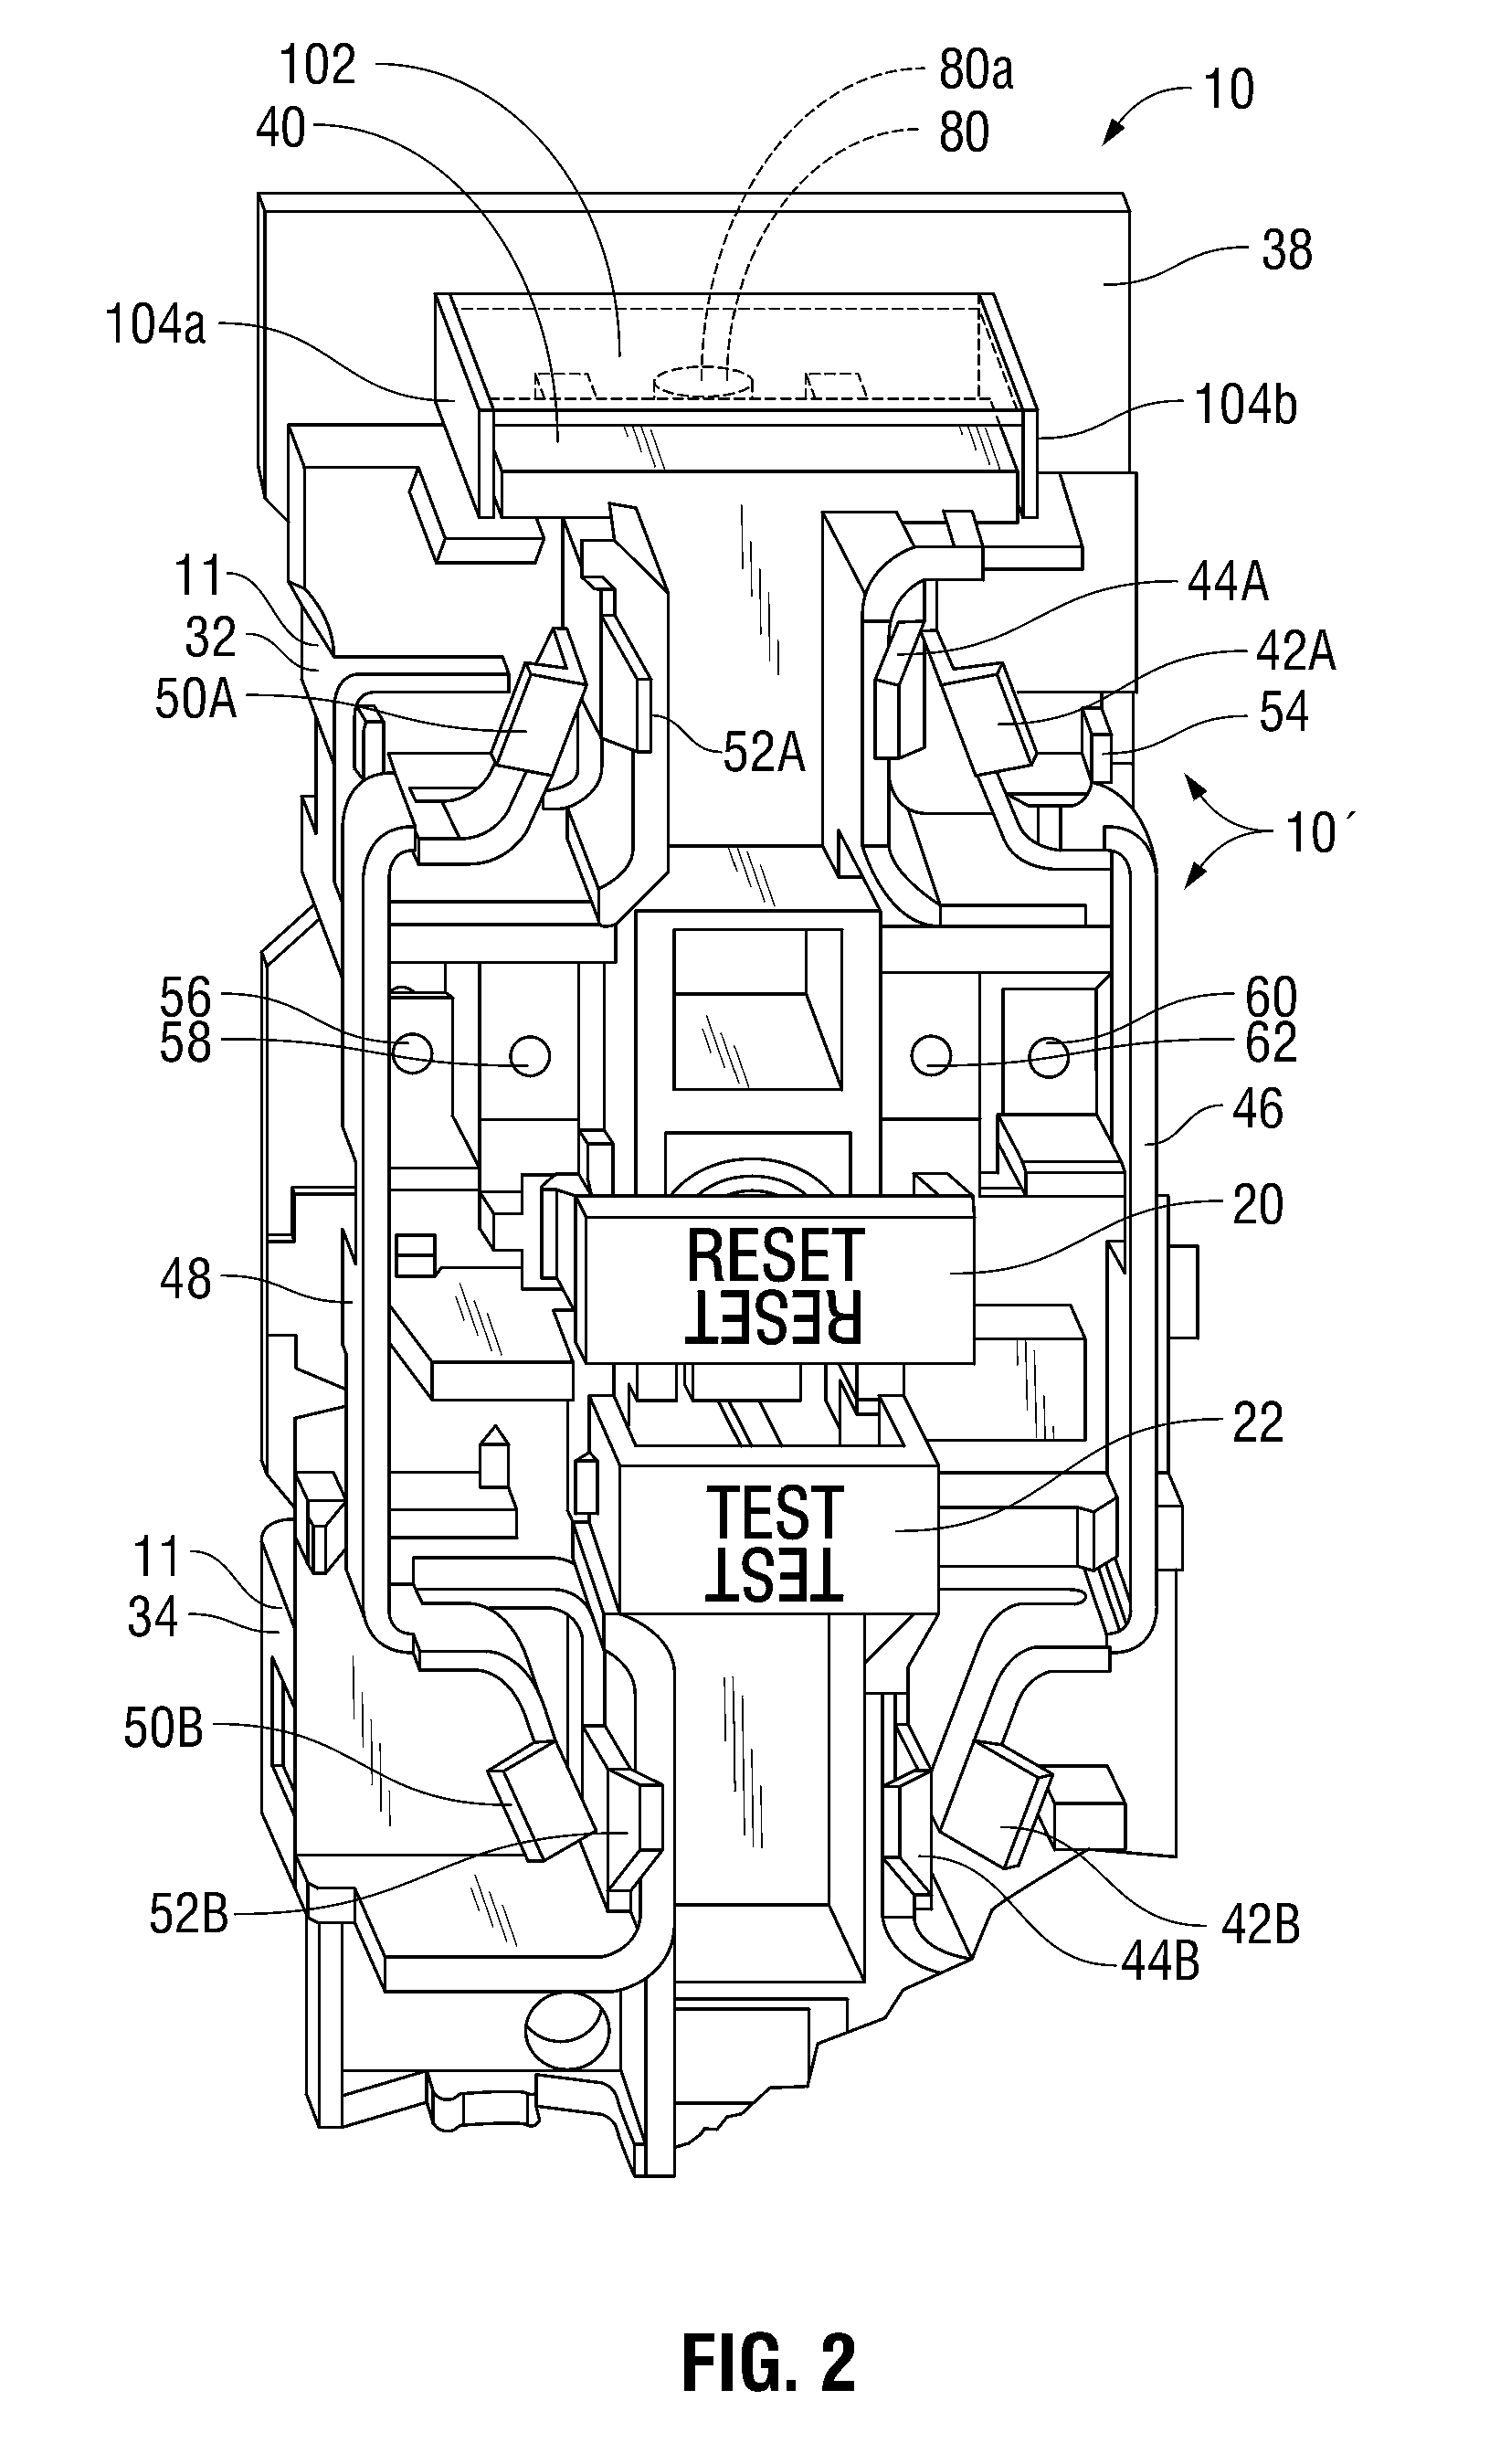 Detecting and sensing actuation in a circuit interrupting device